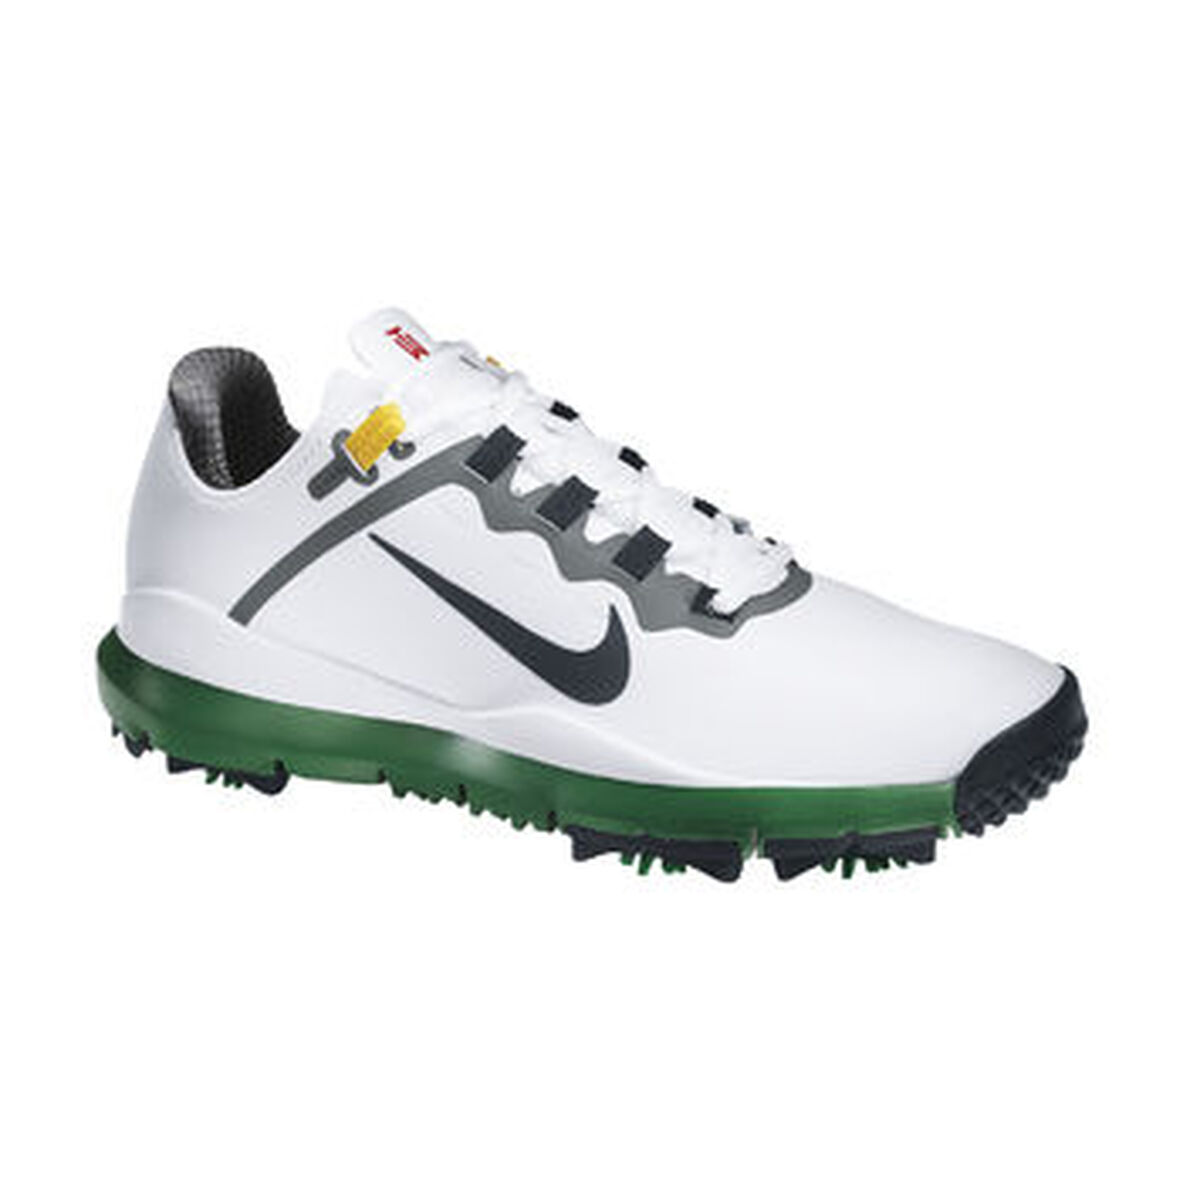 TW 13 Limited Edition by Nike: Shop Quality Nike Men's Golf Shoes | PGA ...